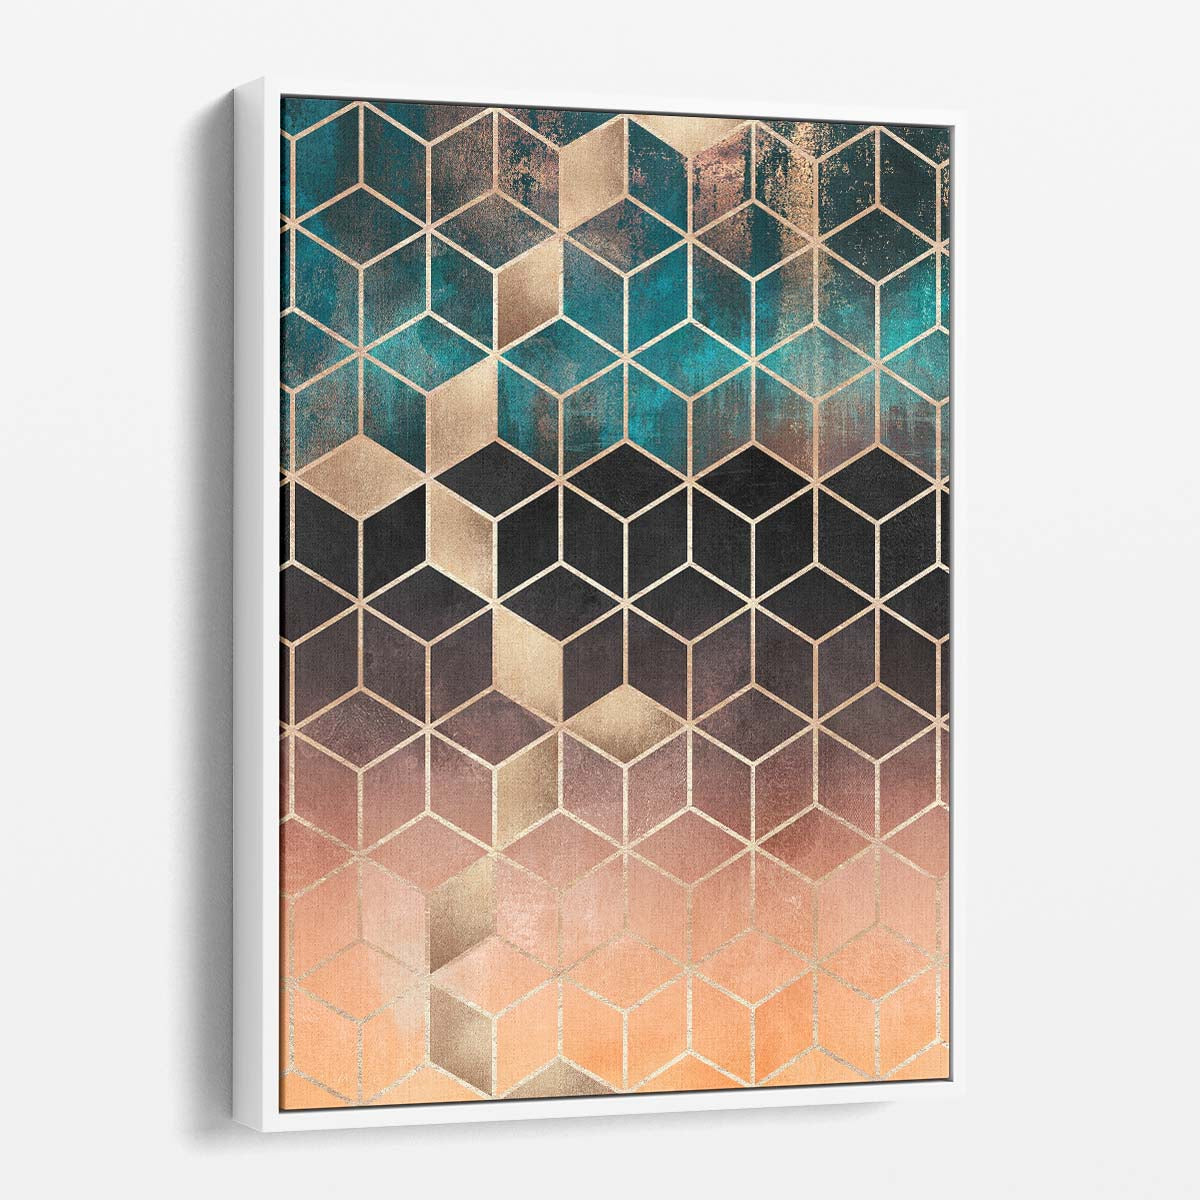 Golden Ombre Cube Illustration Colorful Geometric Mosaic Wall Art by Luxuriance Designs, made in USA